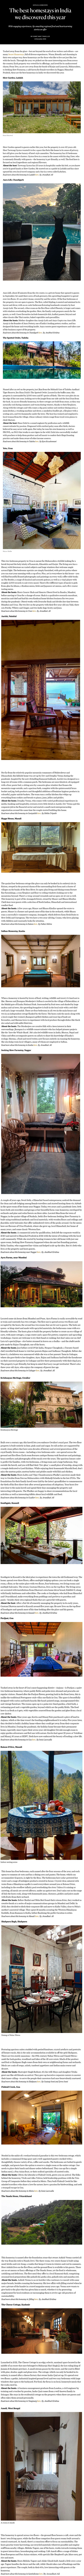 The best homestays in India we discovered this year